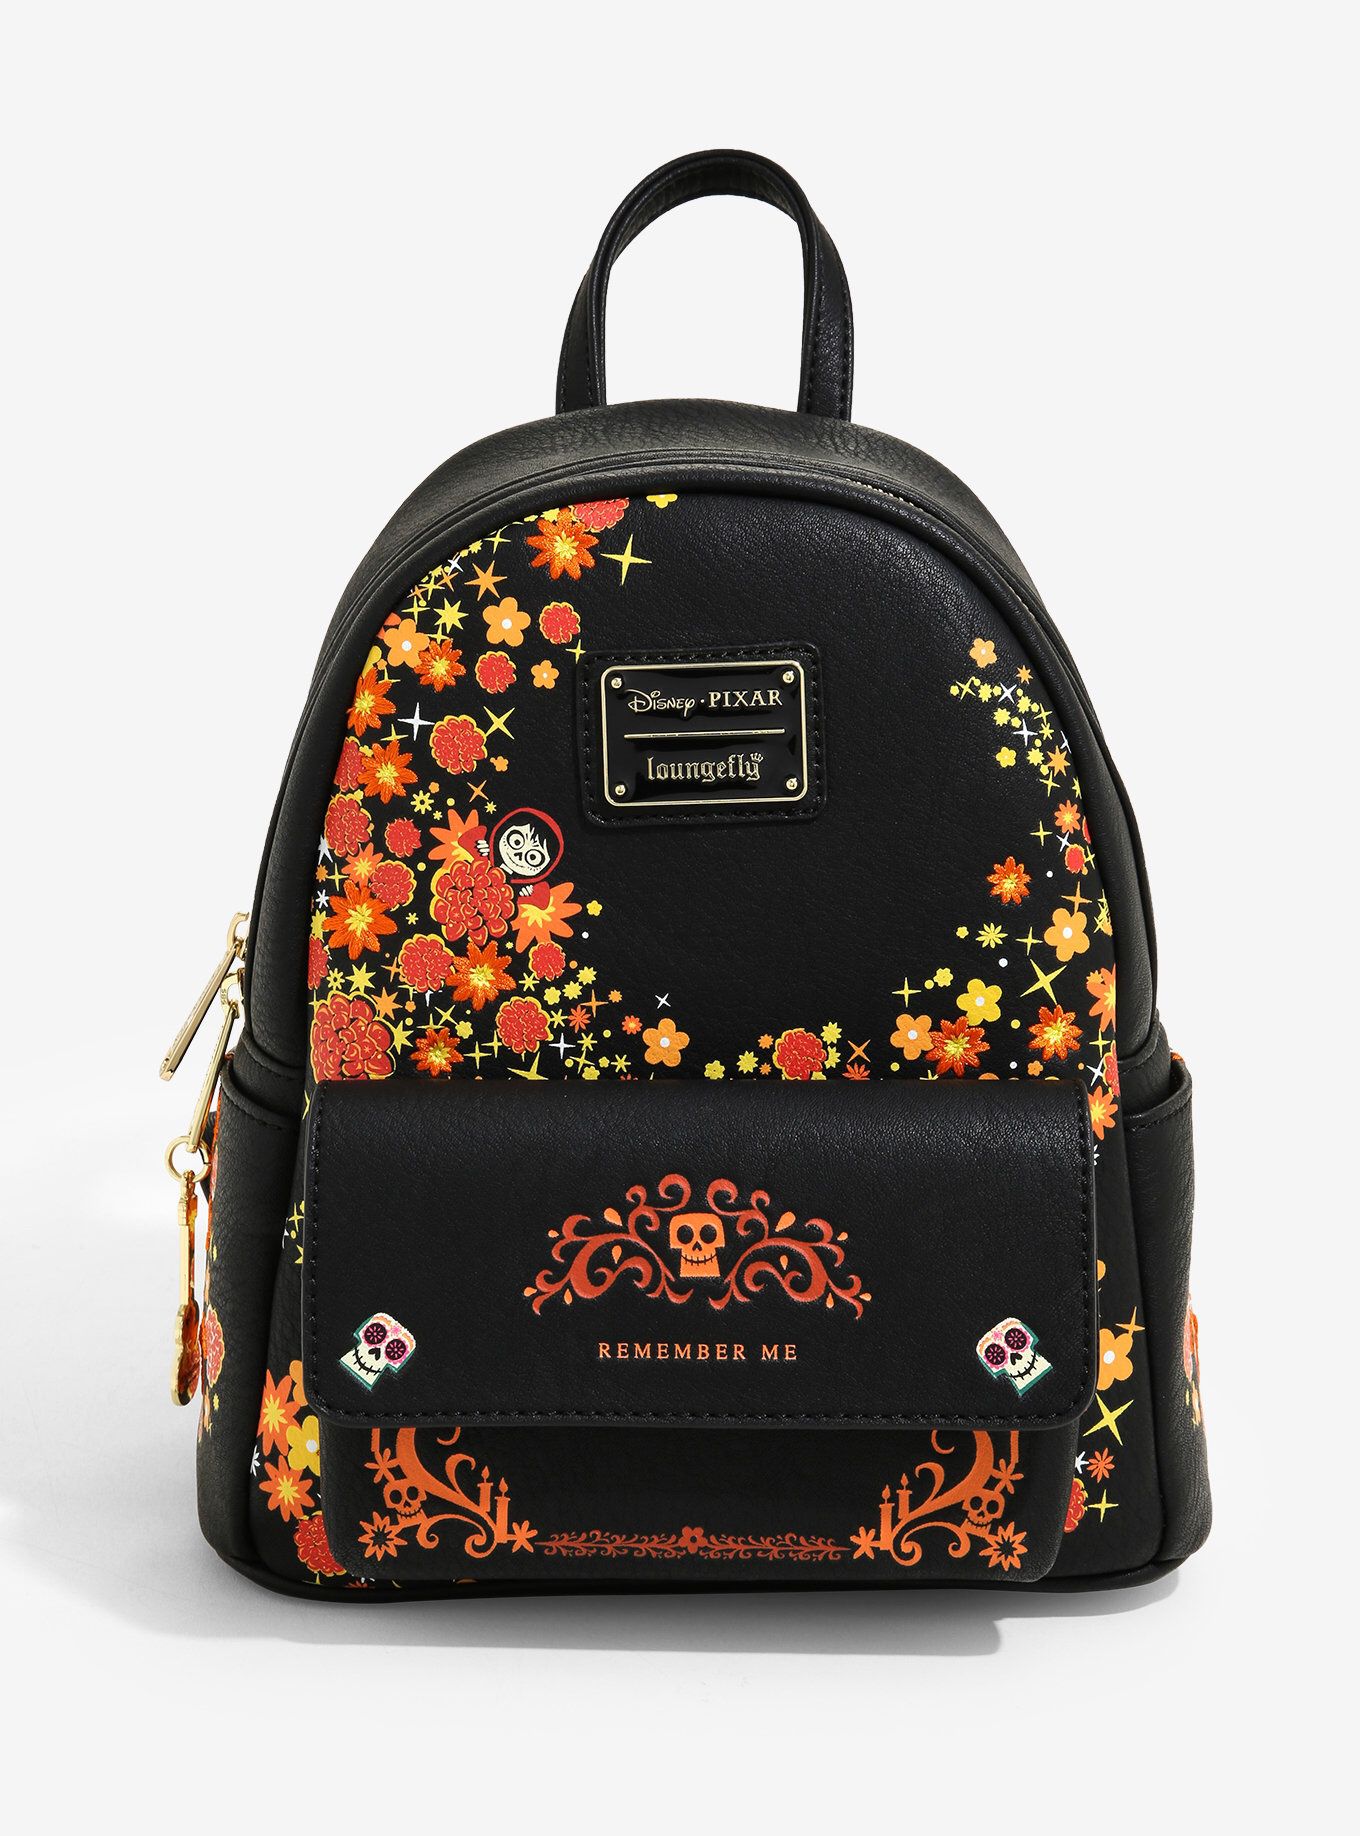 DISNEY PIXAR LOUNGEFLY COCO REMEMBER ME MINI BACKPACK